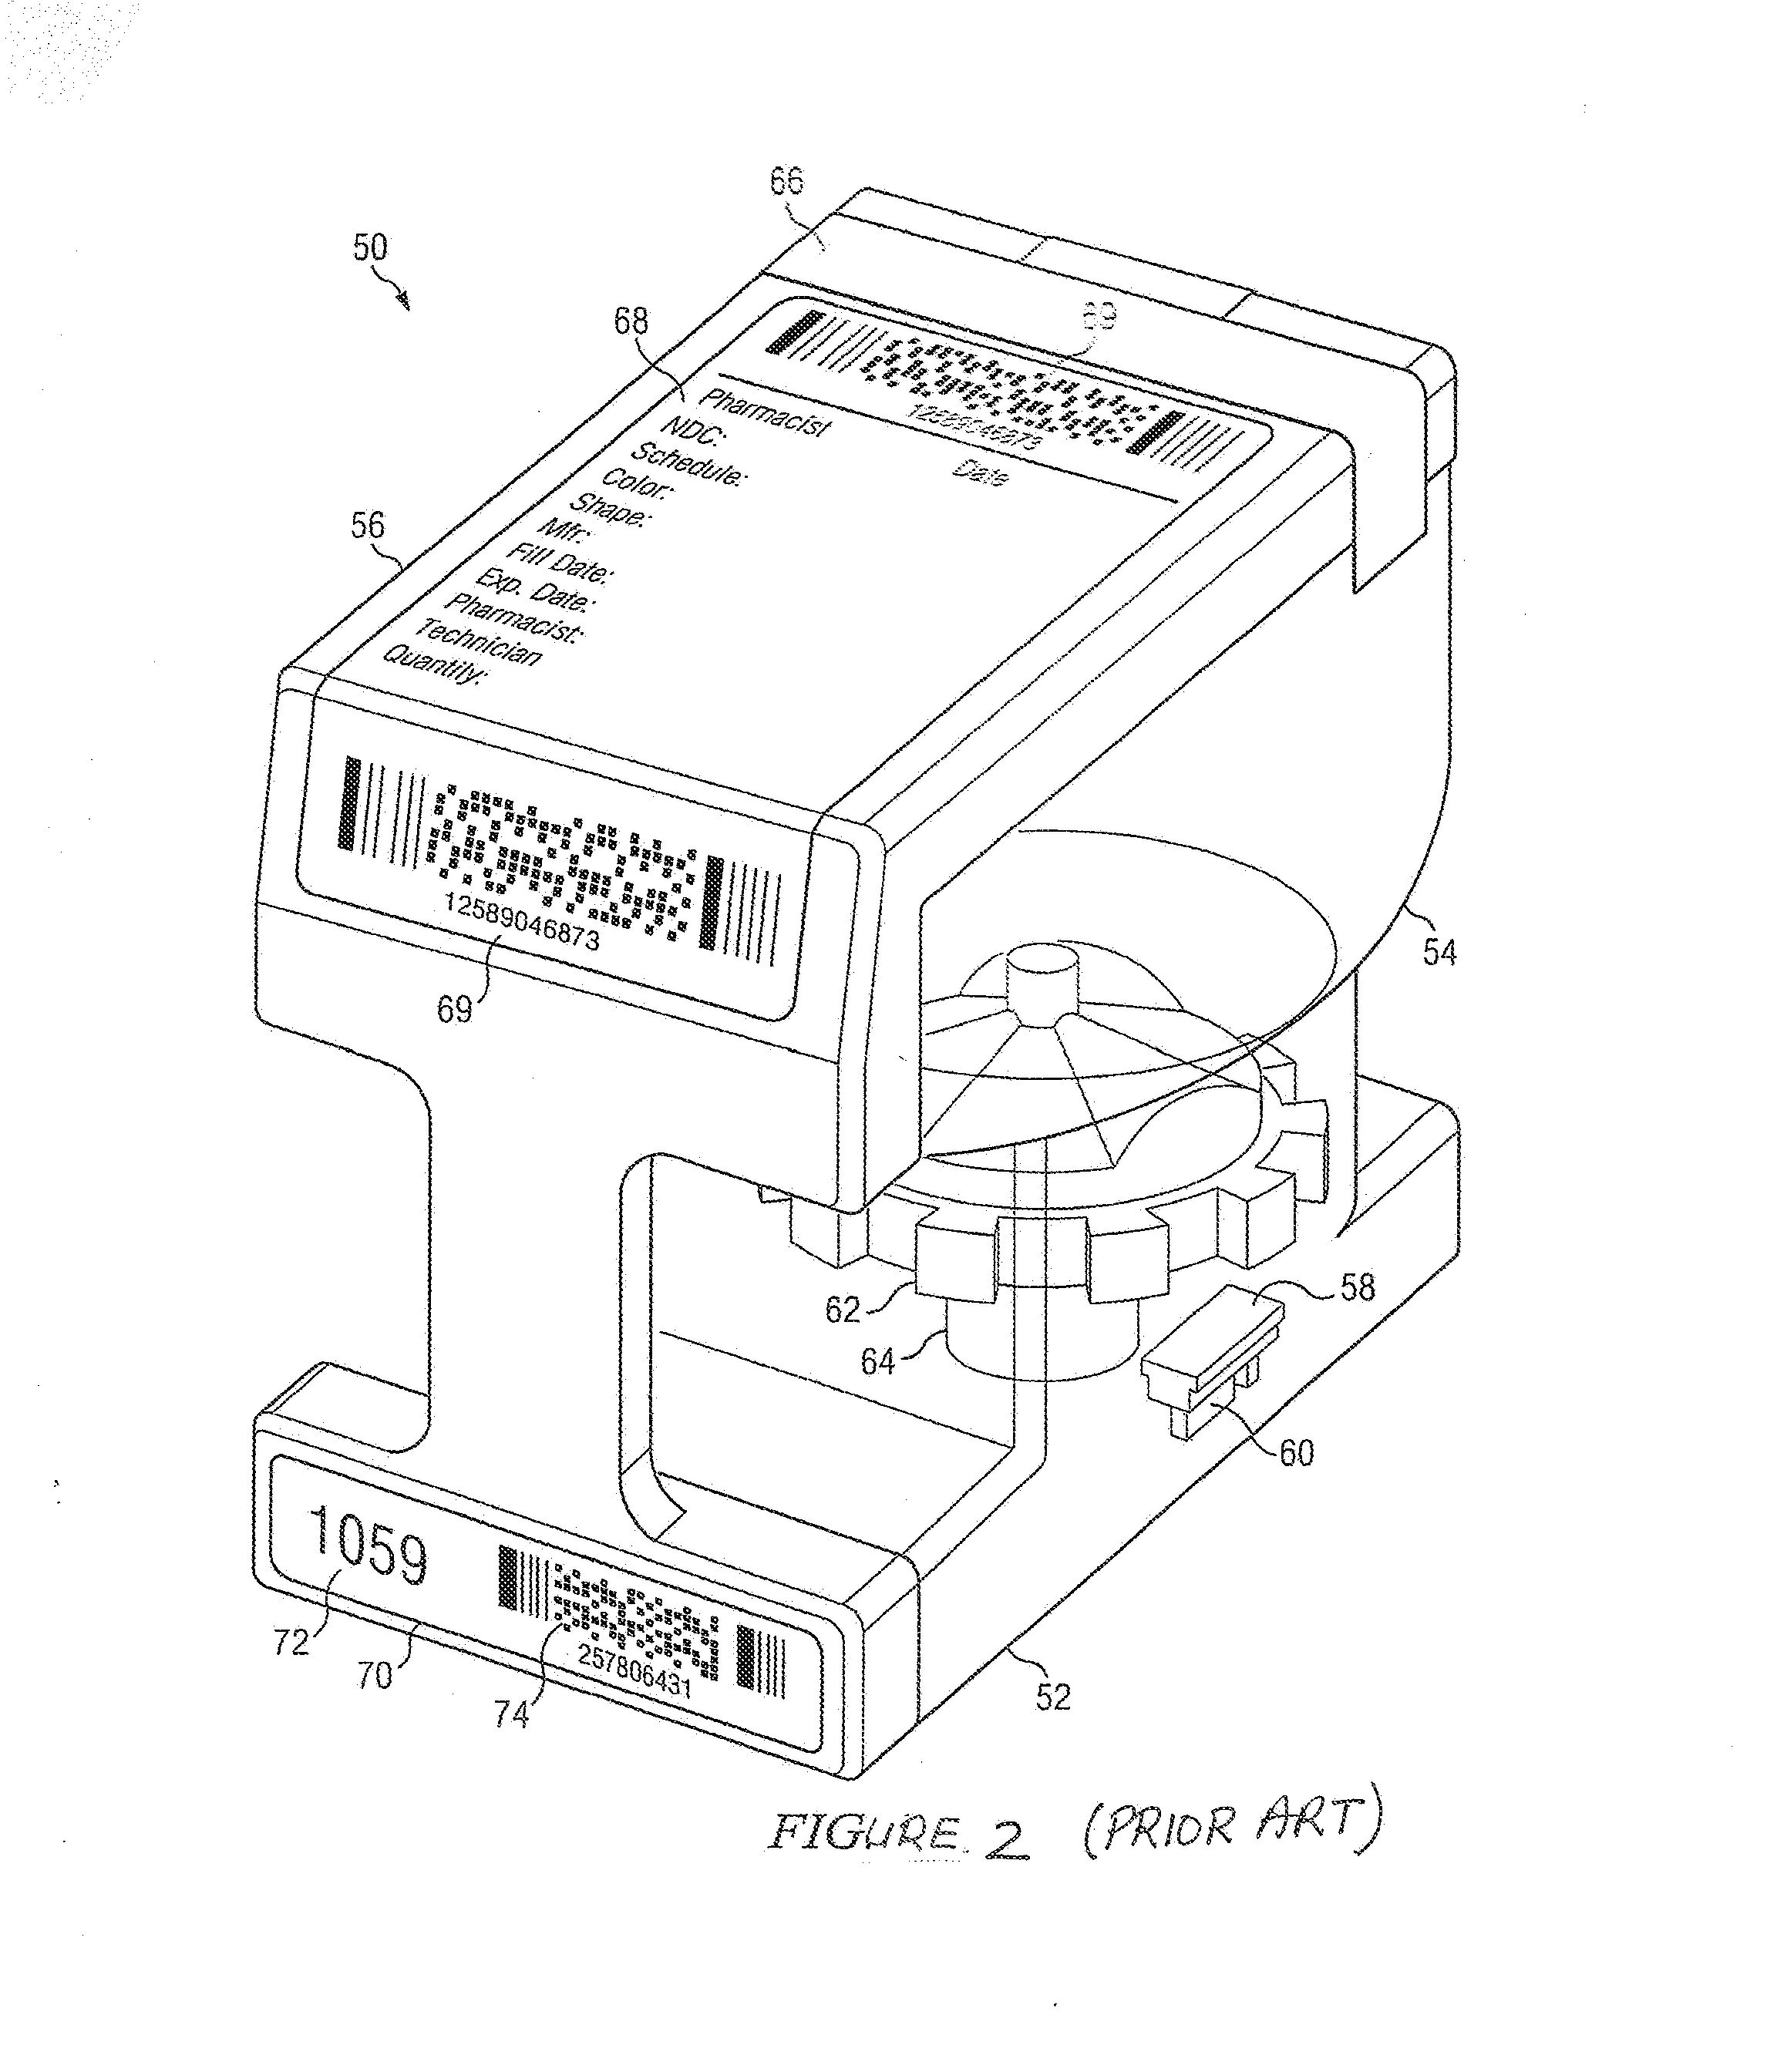 Methods and systems for class-flexible drug dispensing and electronic billing